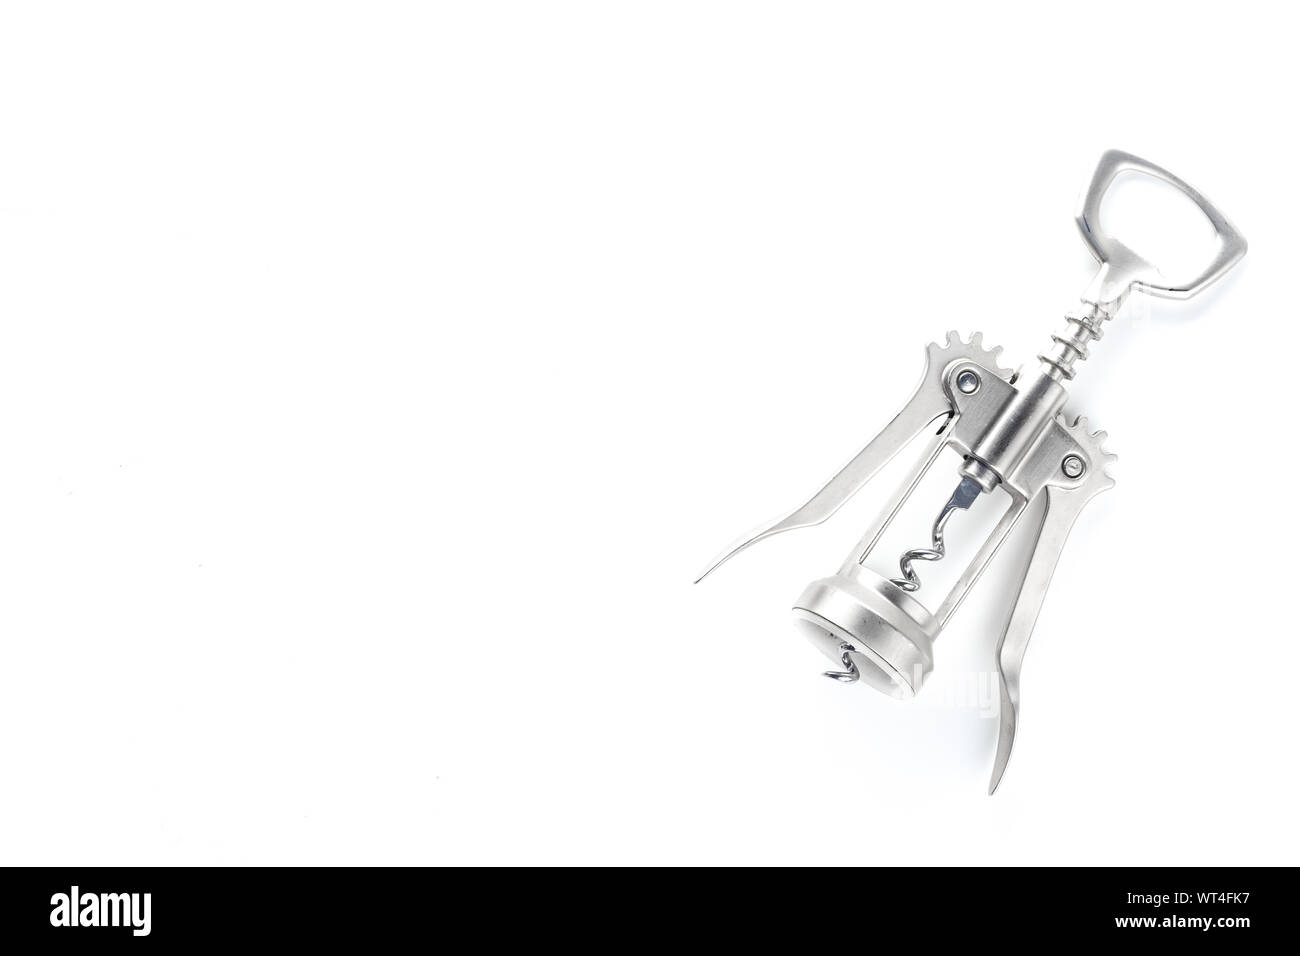 Top view image of corkscrew isolated on white background Stock Photo